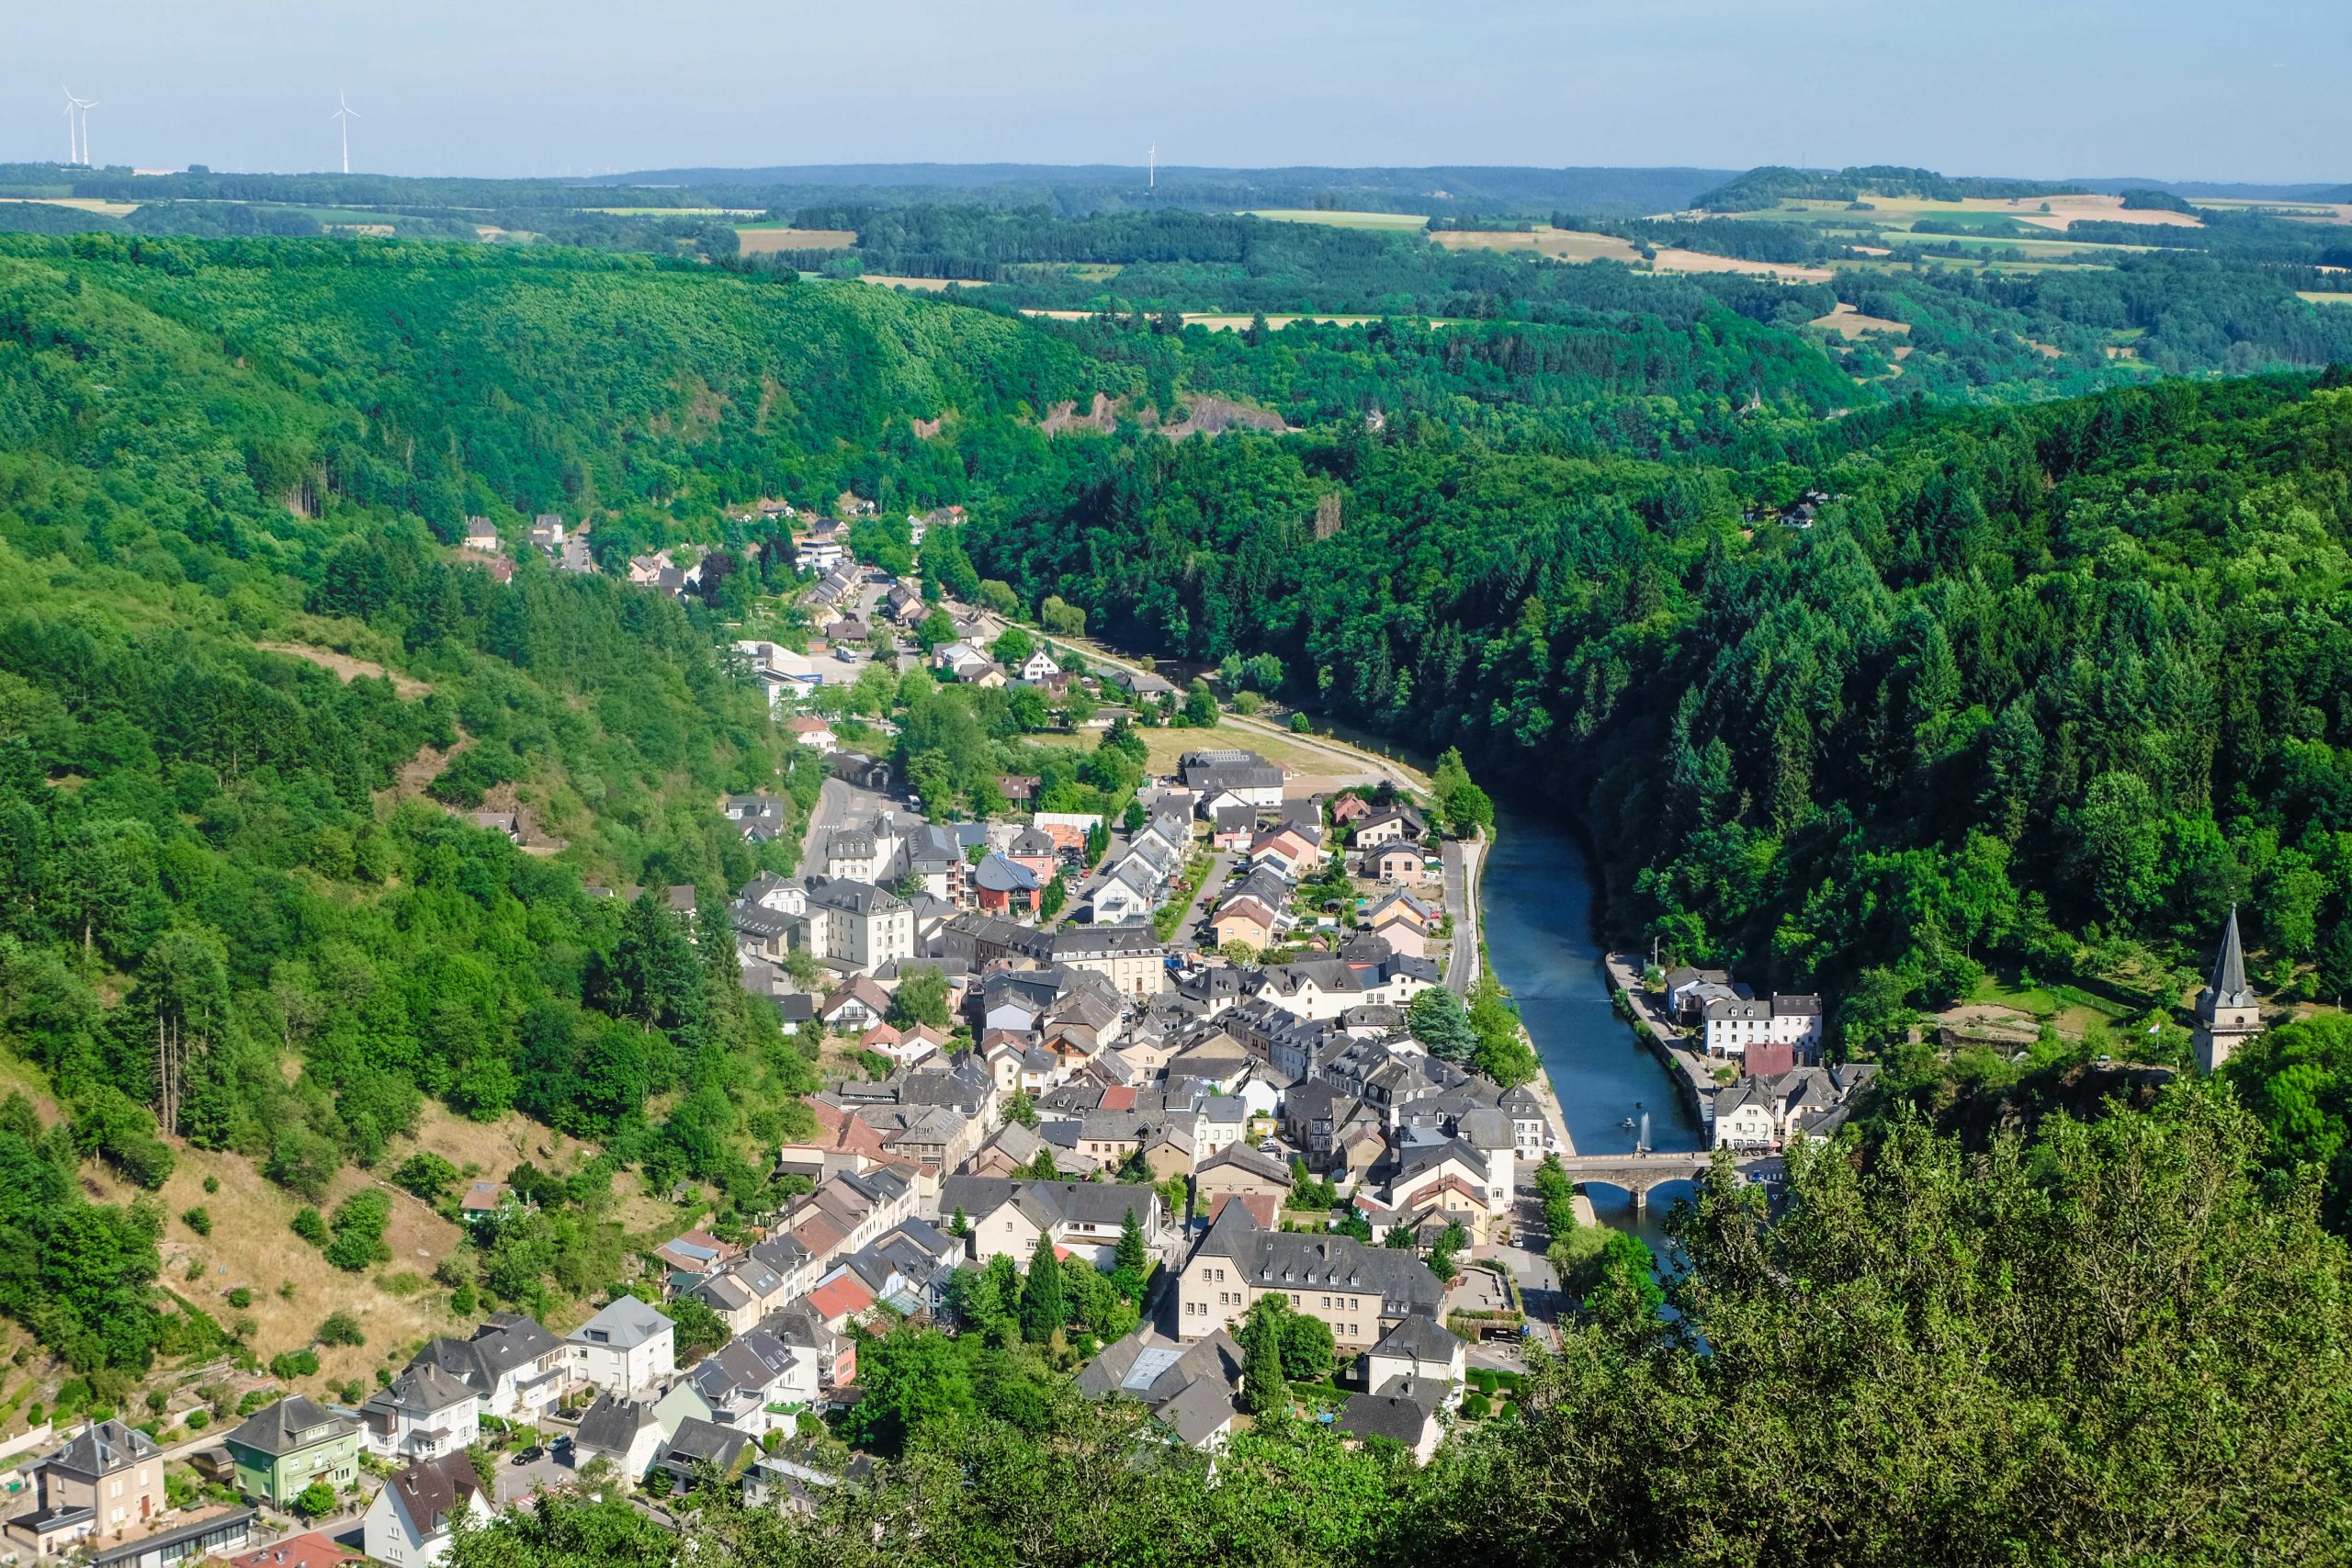 What to see in Luxembourg